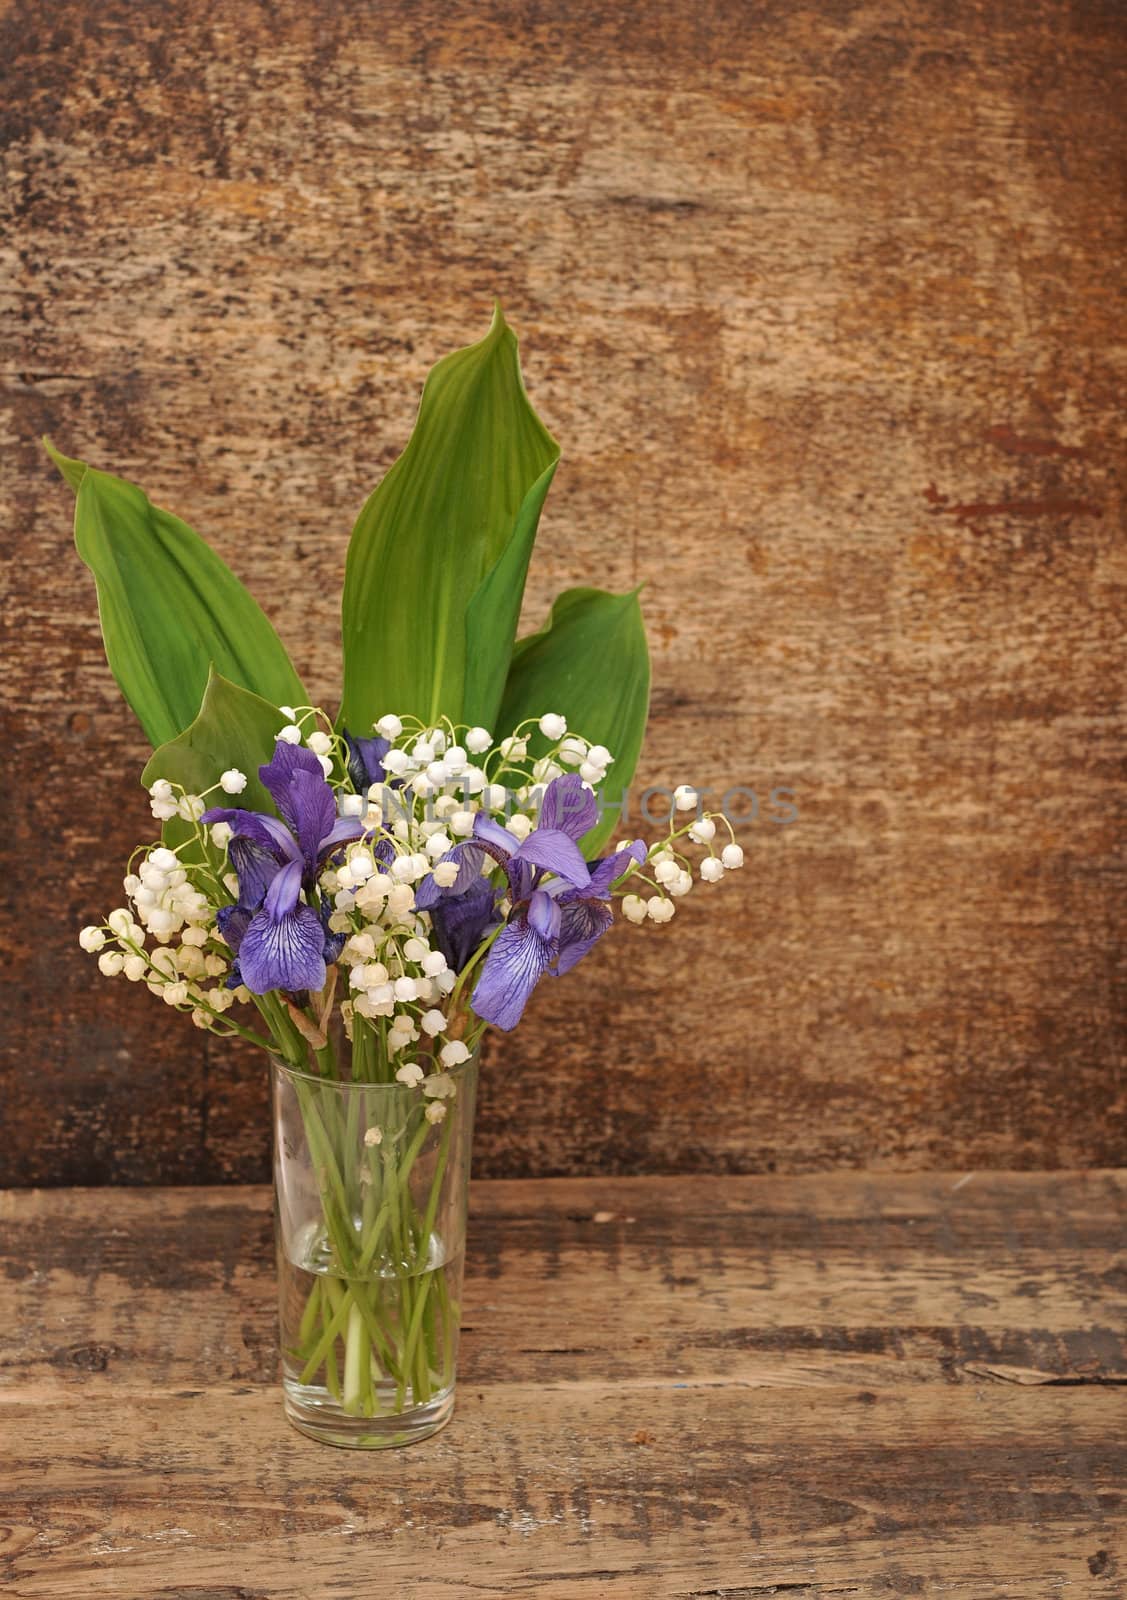 Still-life bouquet of lily of the valley  with blue irises